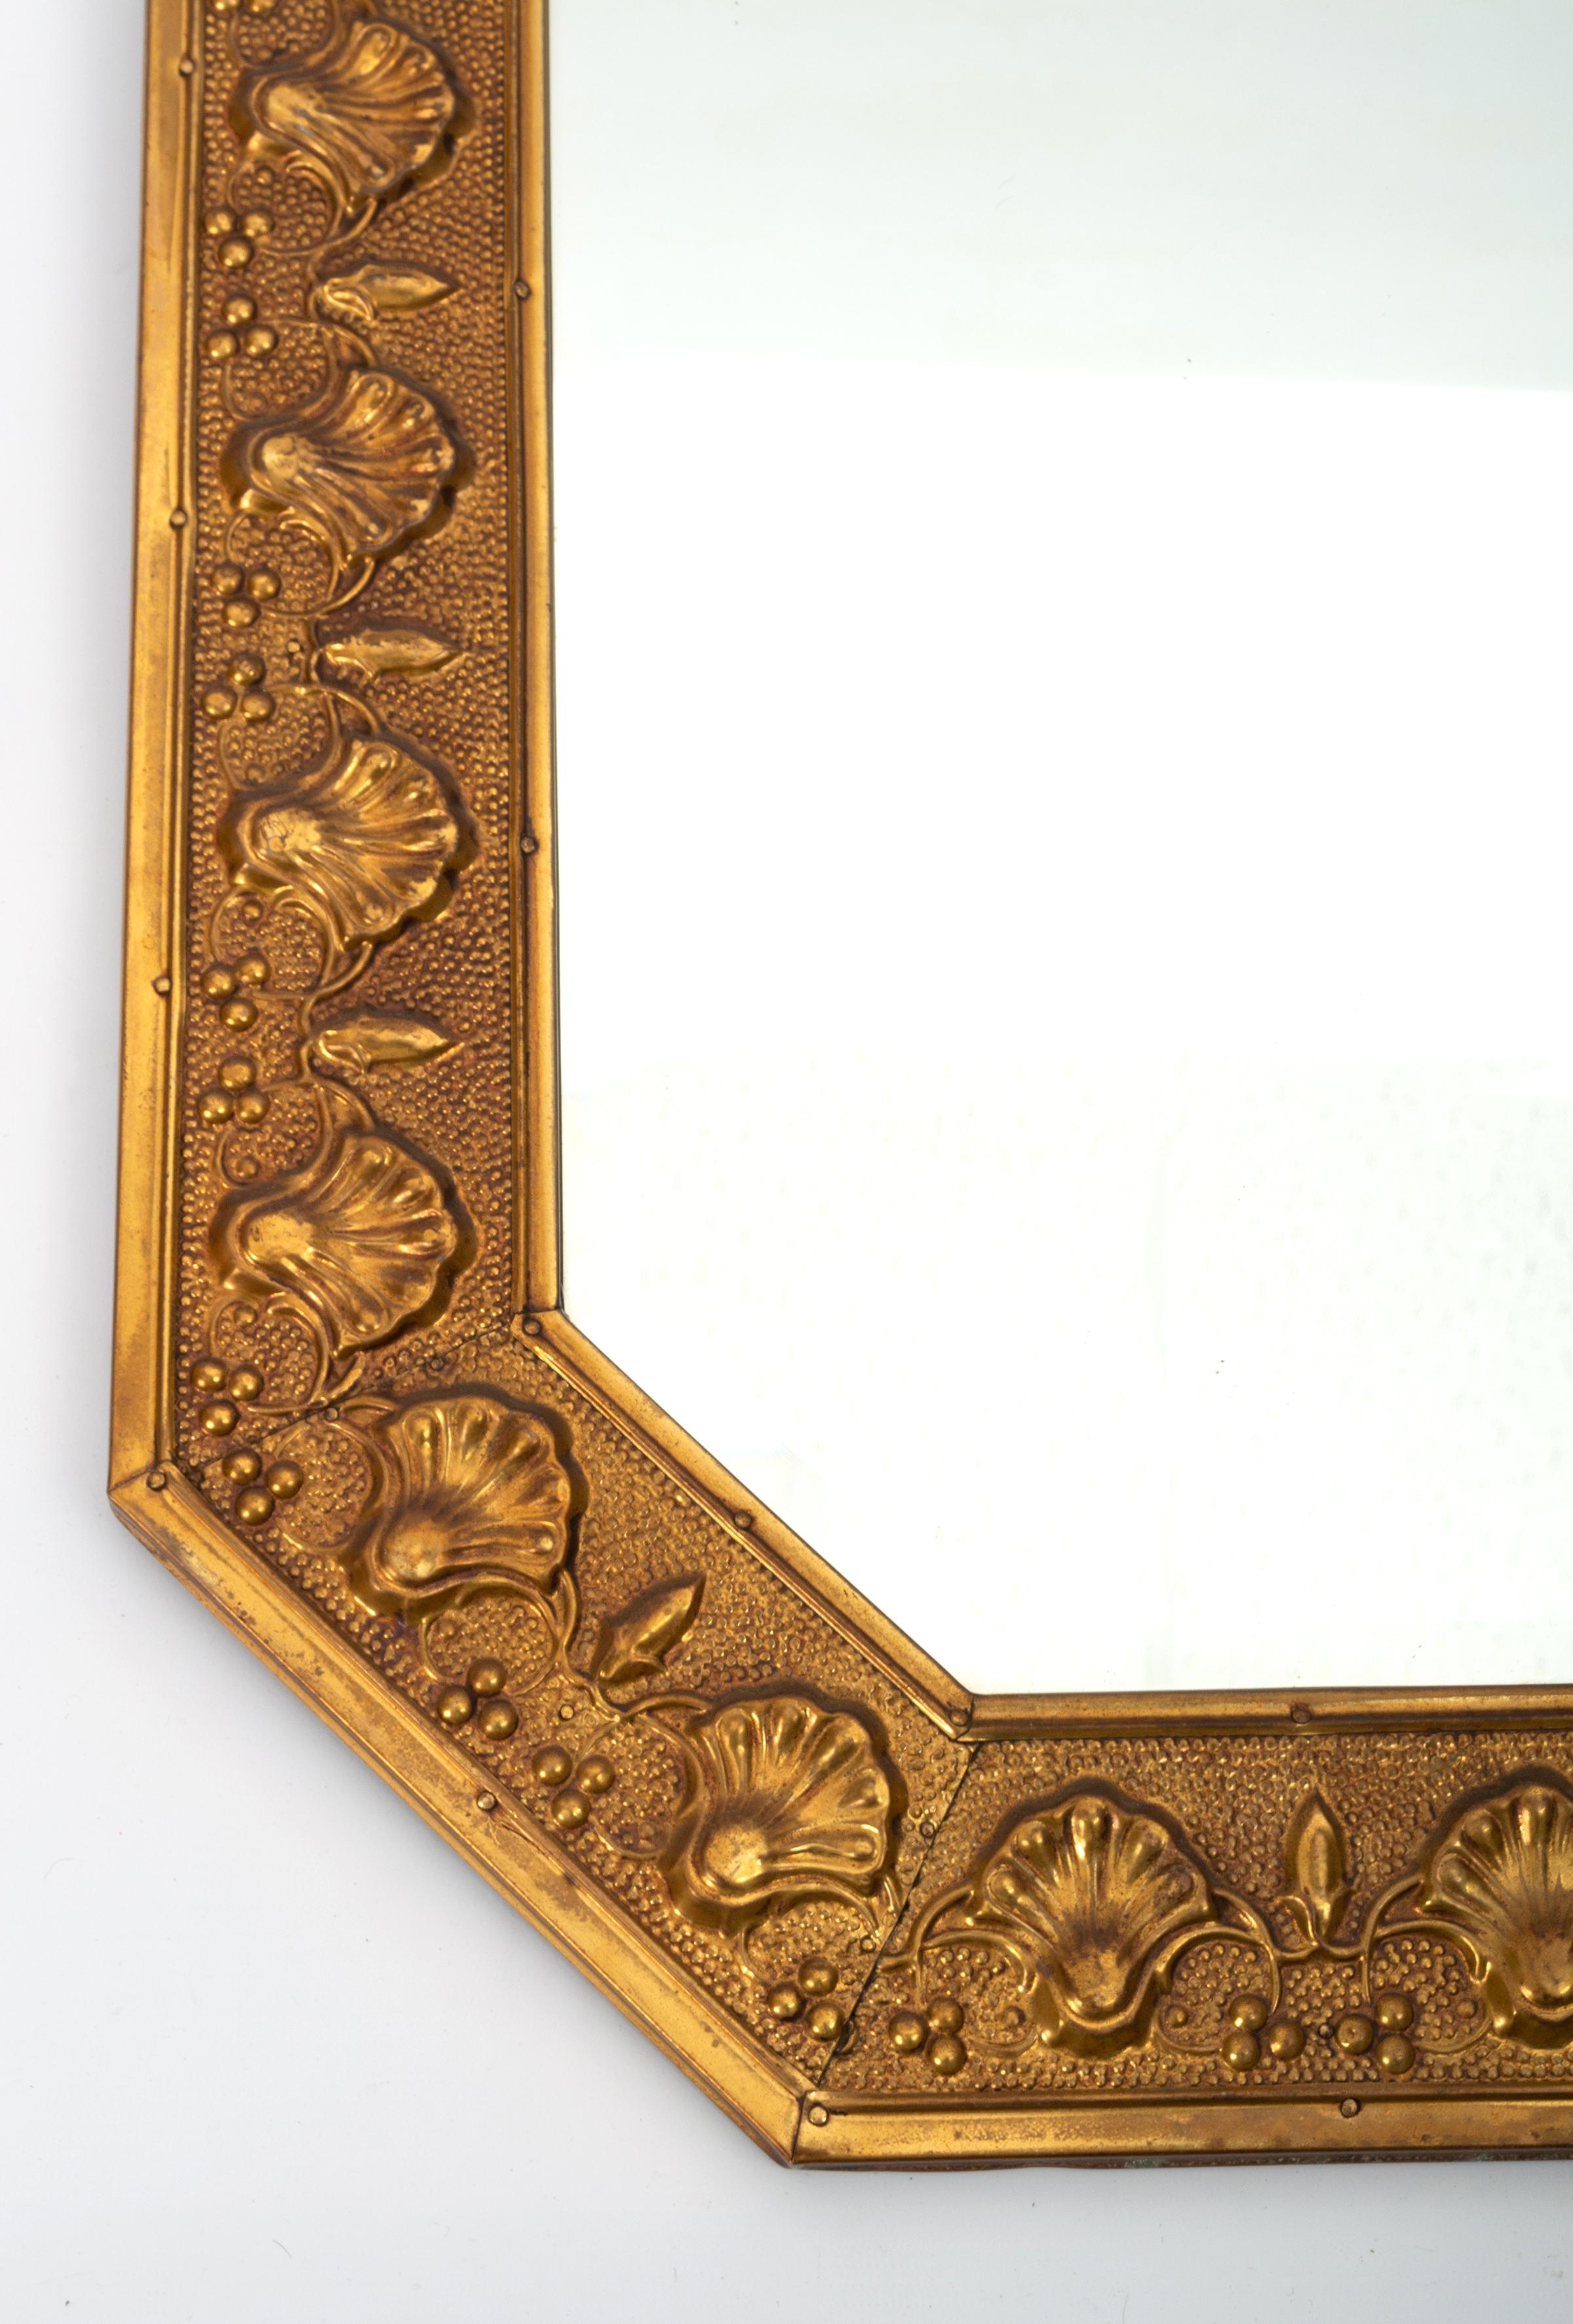 Antique English Arts & Crafts Long Octagonal Repousse Brass Mirror C.1920

In very good condition commensurate with age.